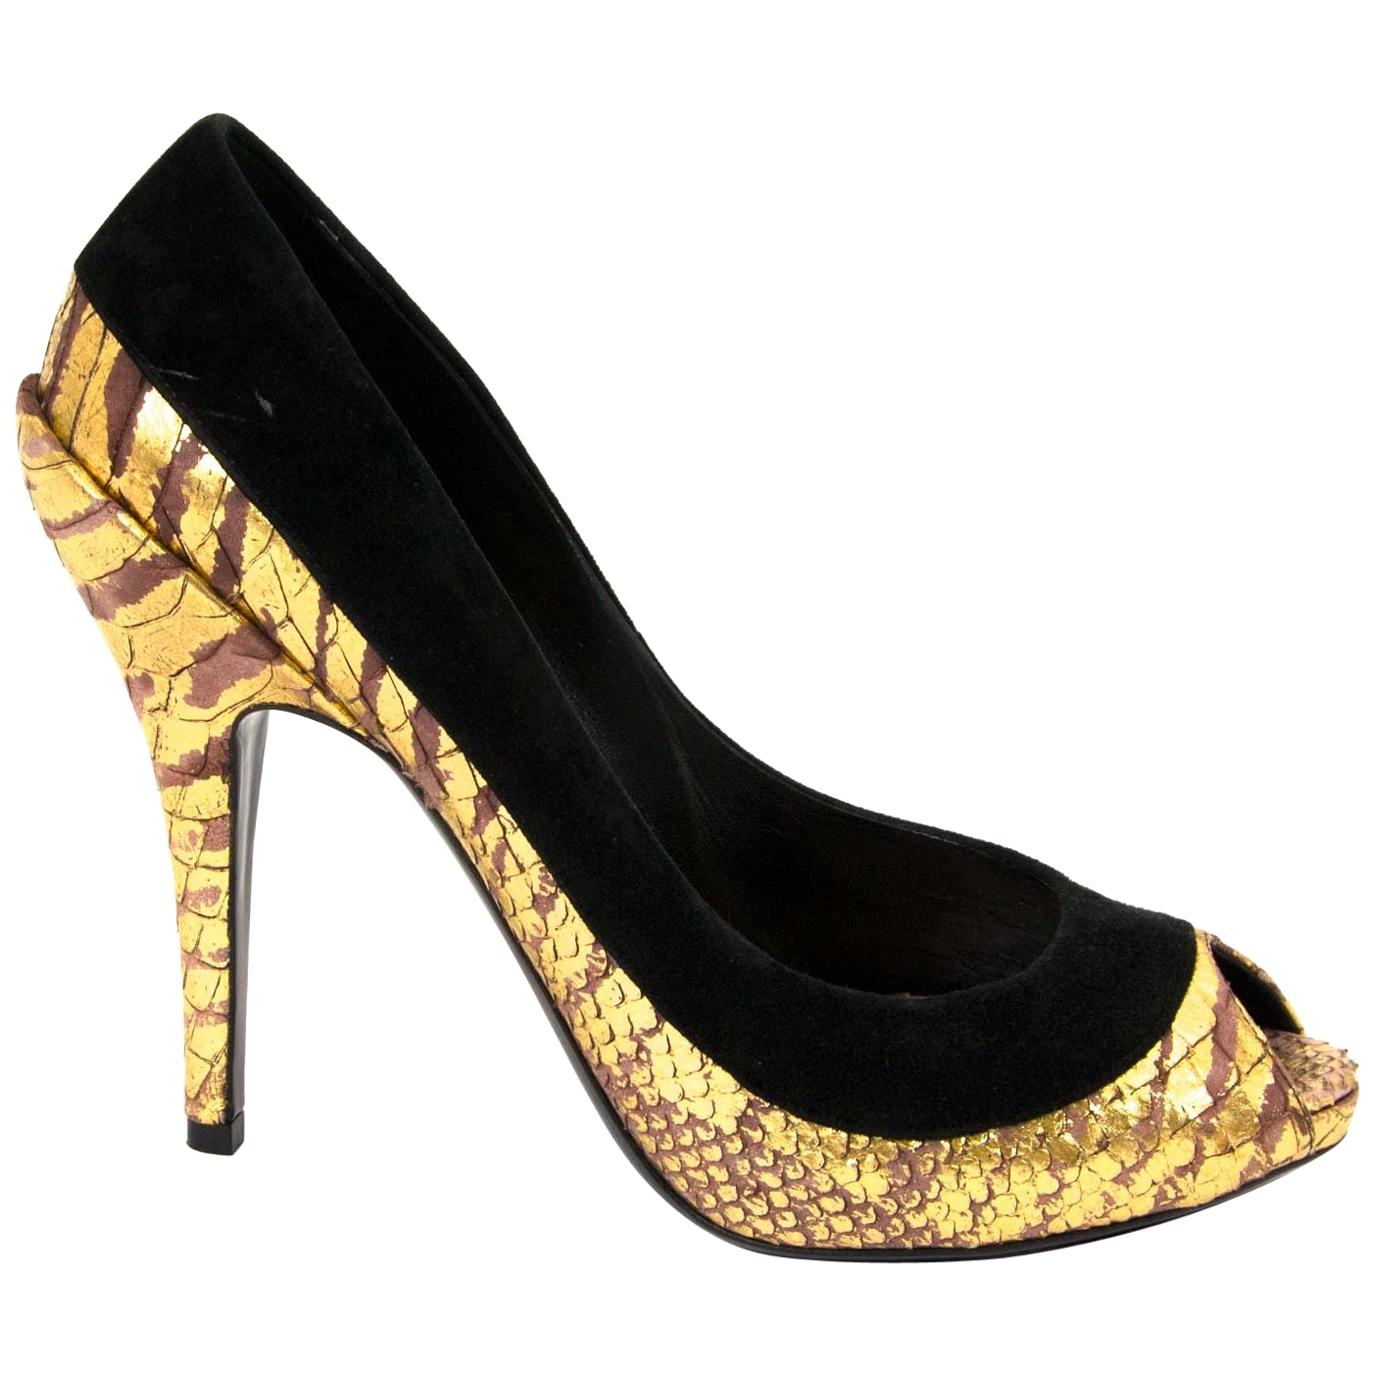 Christian Dior Black And Gold Peep Toe Pumps - Size 38